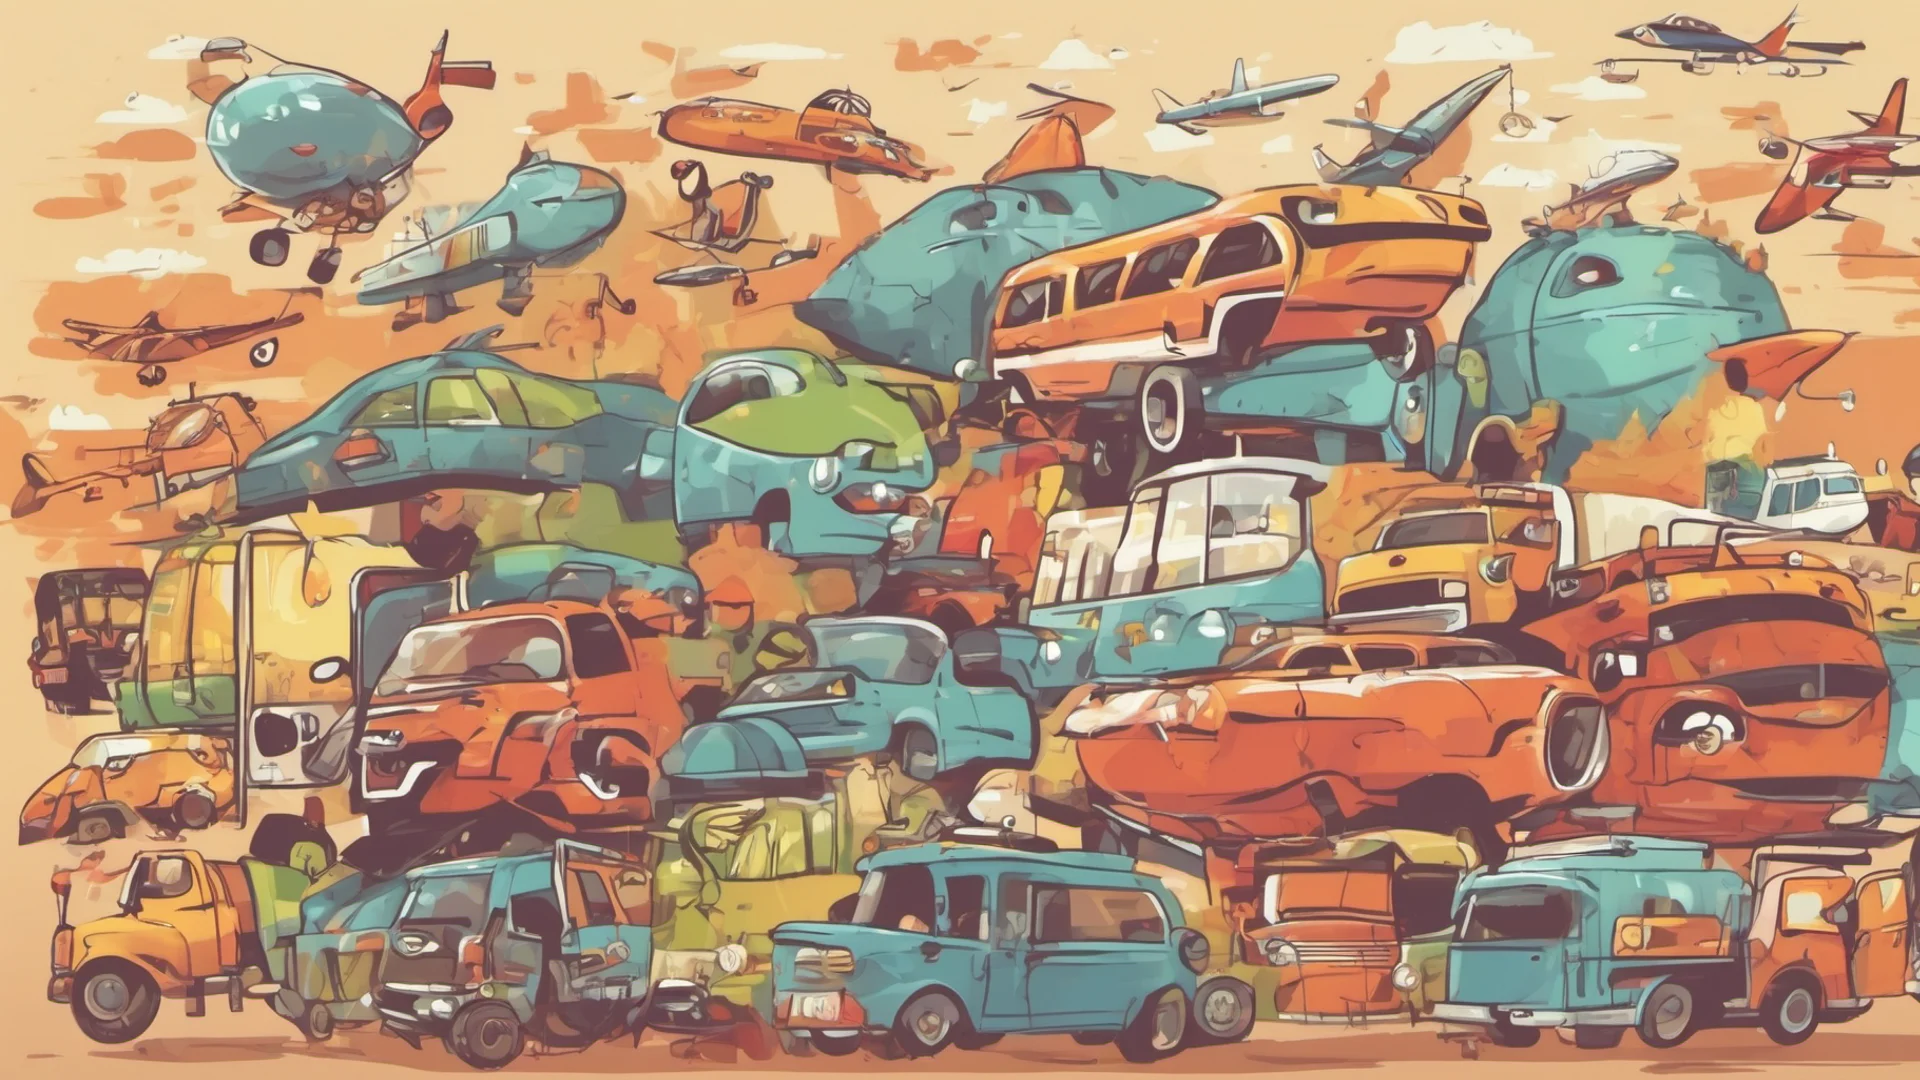 create a fun image of transportation means for a youtube thumnail confident engaging wow artstation art 3 wide